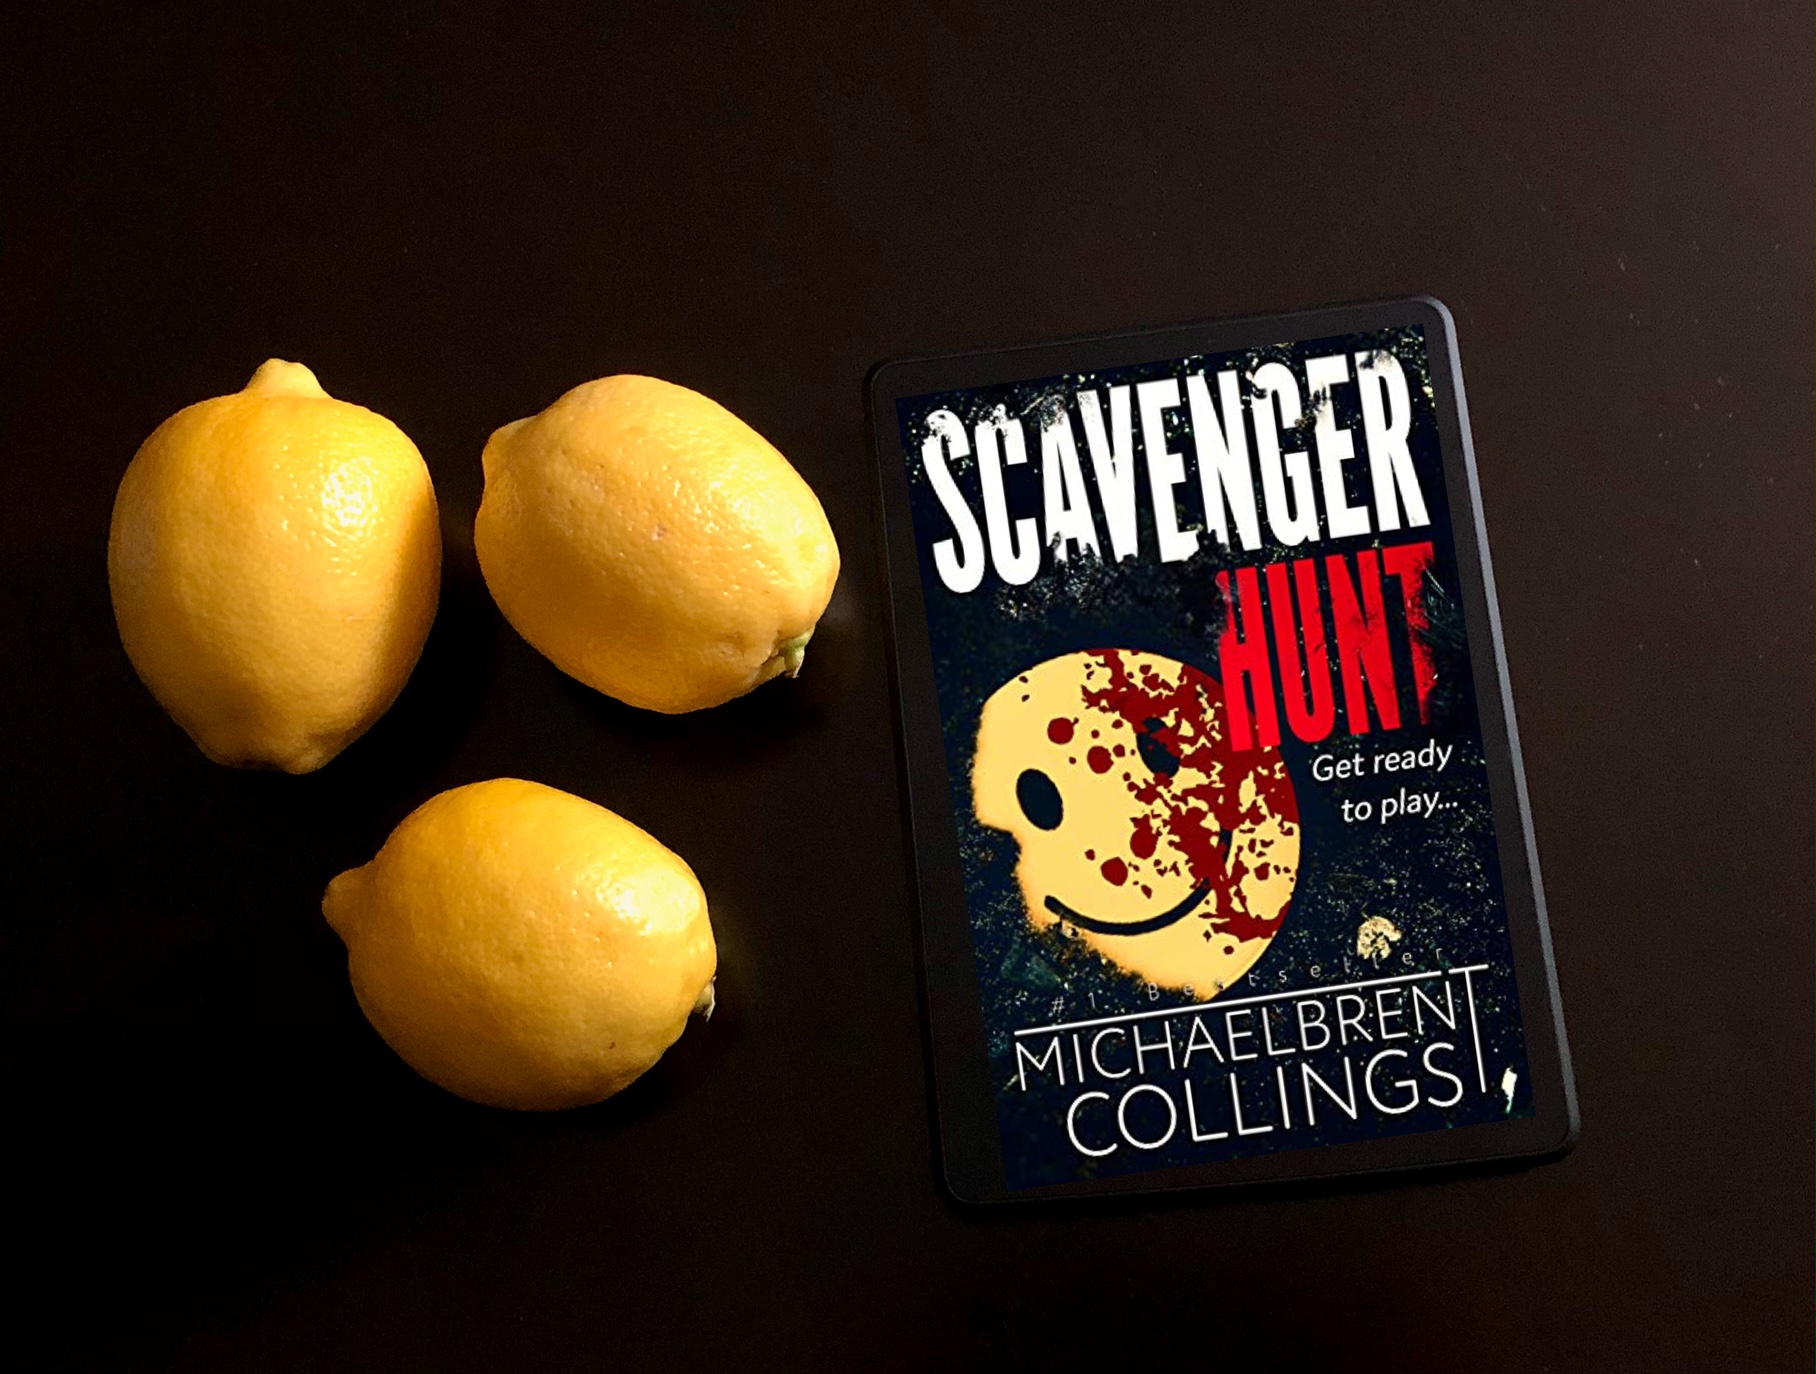 Scavenger Hunt by Michaelbrent Collings book photo by Erica Robyn Reads